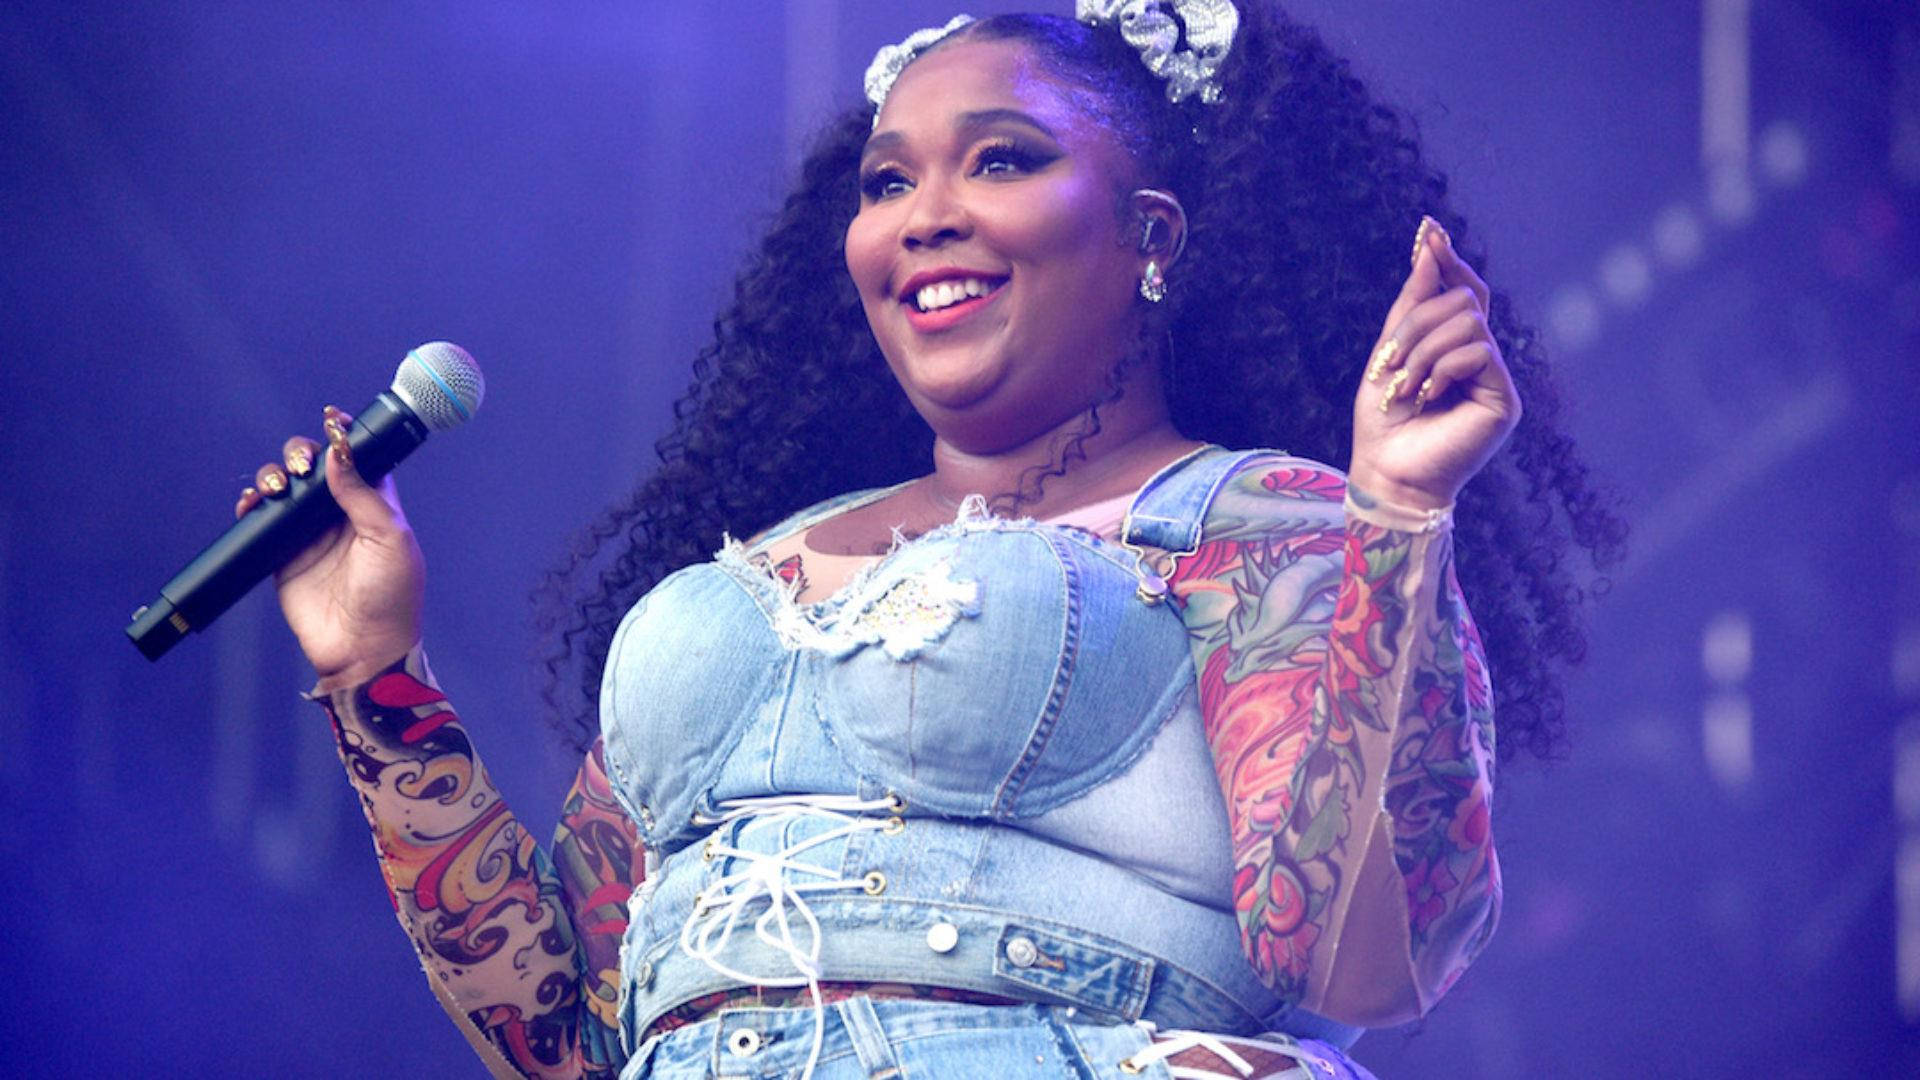 Lizzo With Tattooed Body Suit Background